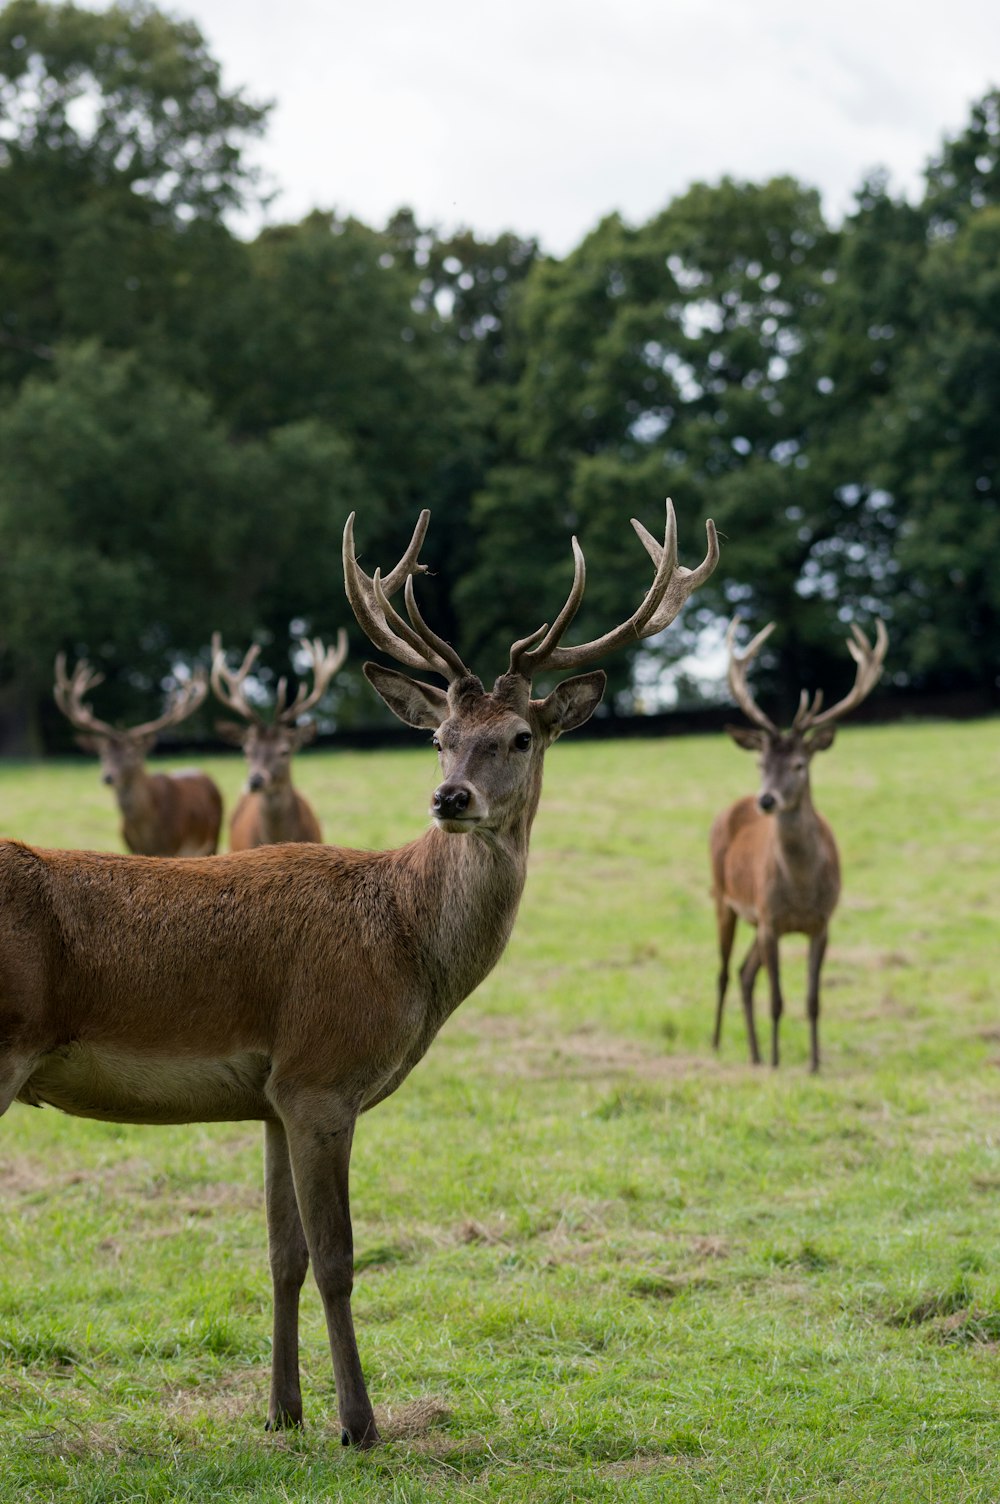 four brown deers standing on grass near trees